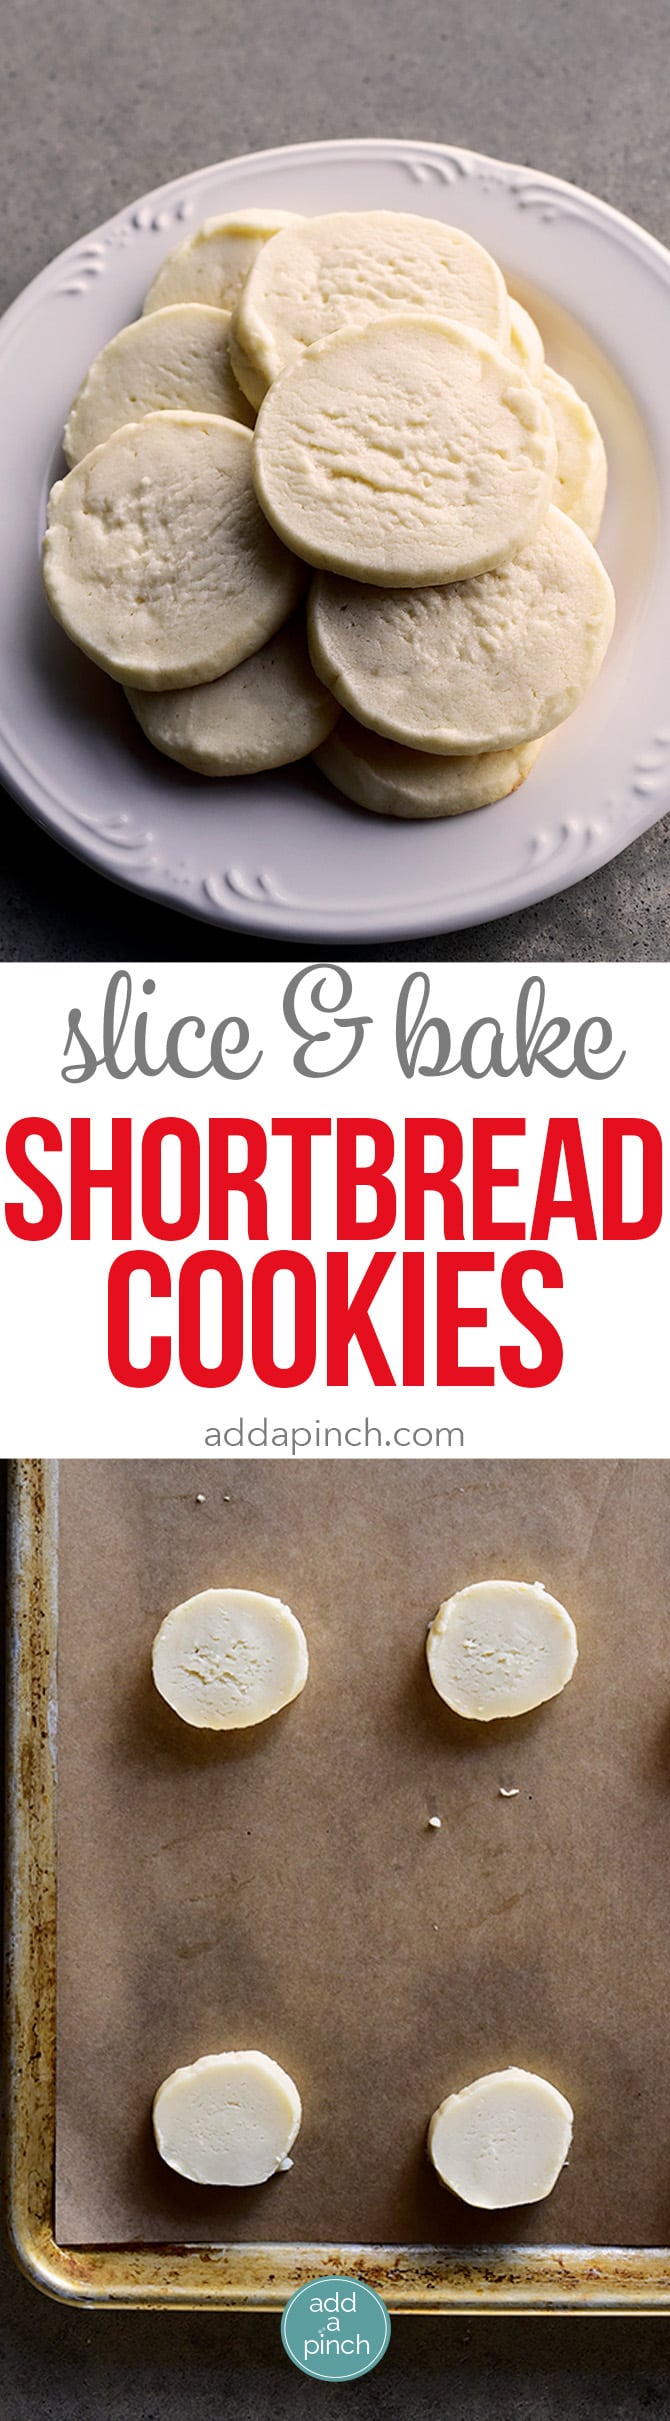 Slice and Bake Shortbread Cookies Recipe - Slice and Bake Shortbread Cookies make an easy and delicious cookie recipe. Made with just four ingredients these shortbread cookies are a great make ahead cookie for all sorts of occasions. // addapinch.com